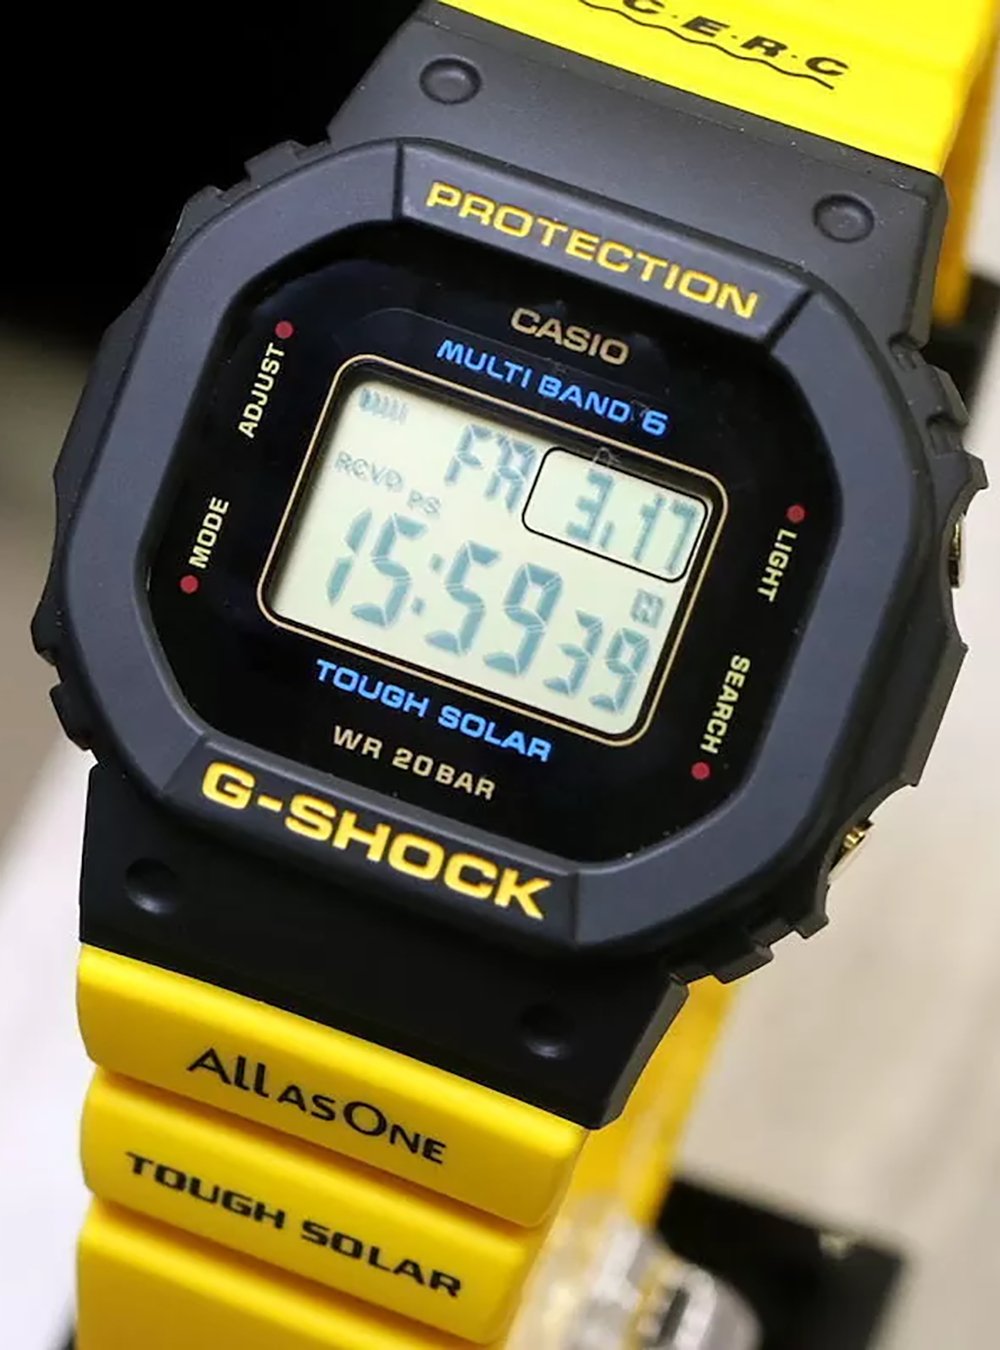 CASIO G-SHOCK WATCH I.C.E.R.C. COLLABORATION MODEL LOVE THE SEA AND THE EARTH GMD-W5600K-9JR LIMITED EDITION JDMWRISTWATCHjapan-select